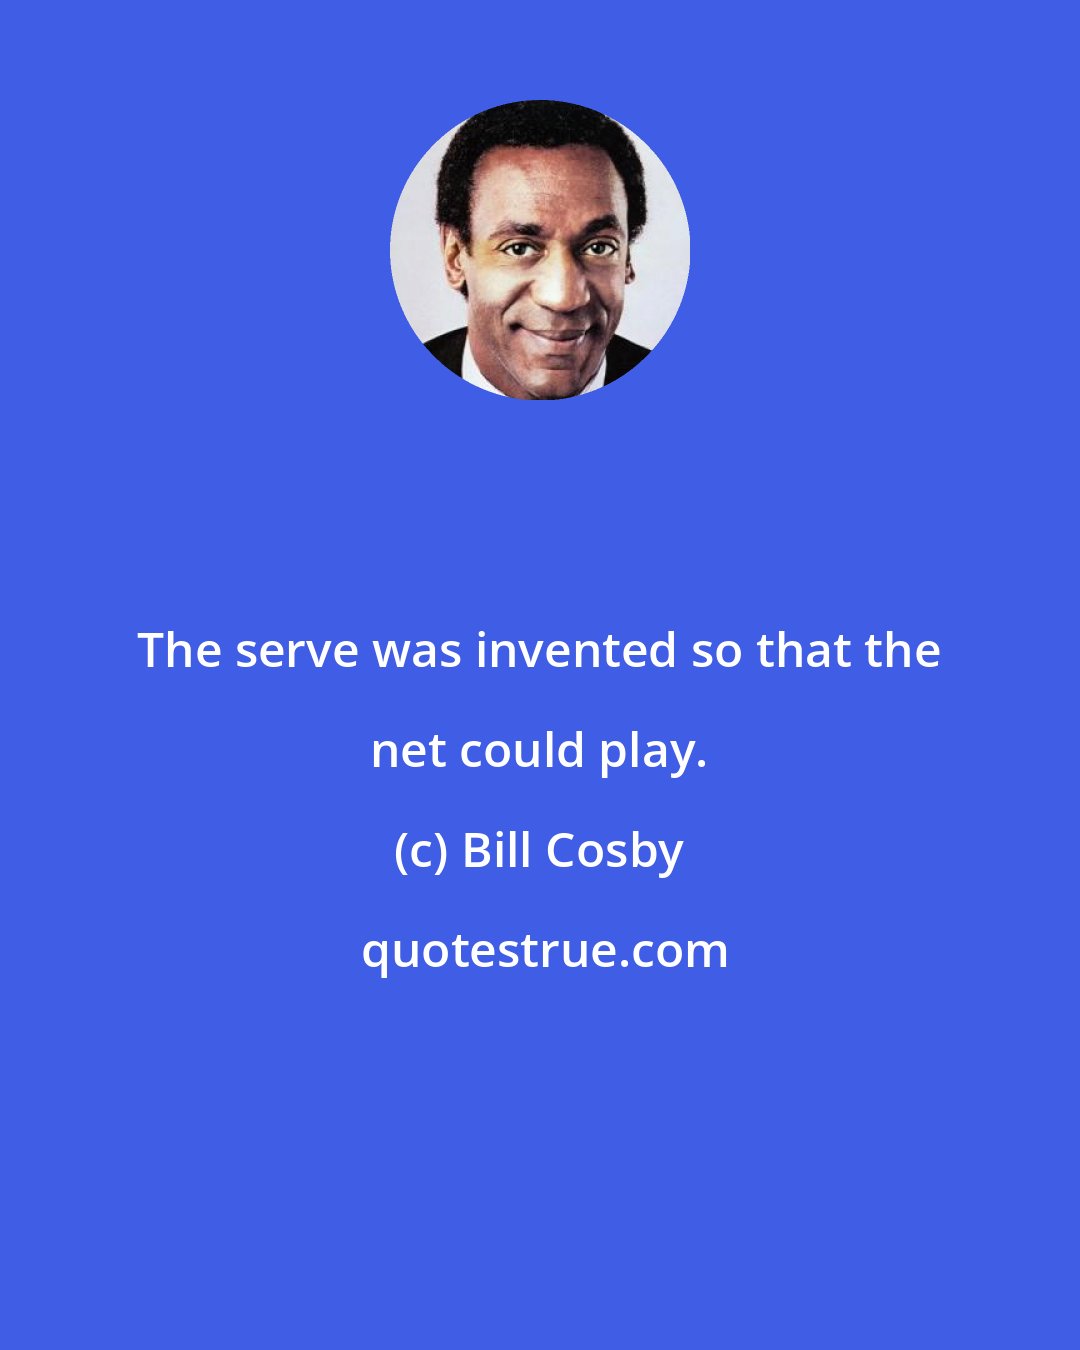 Bill Cosby: The serve was invented so that the net could play.